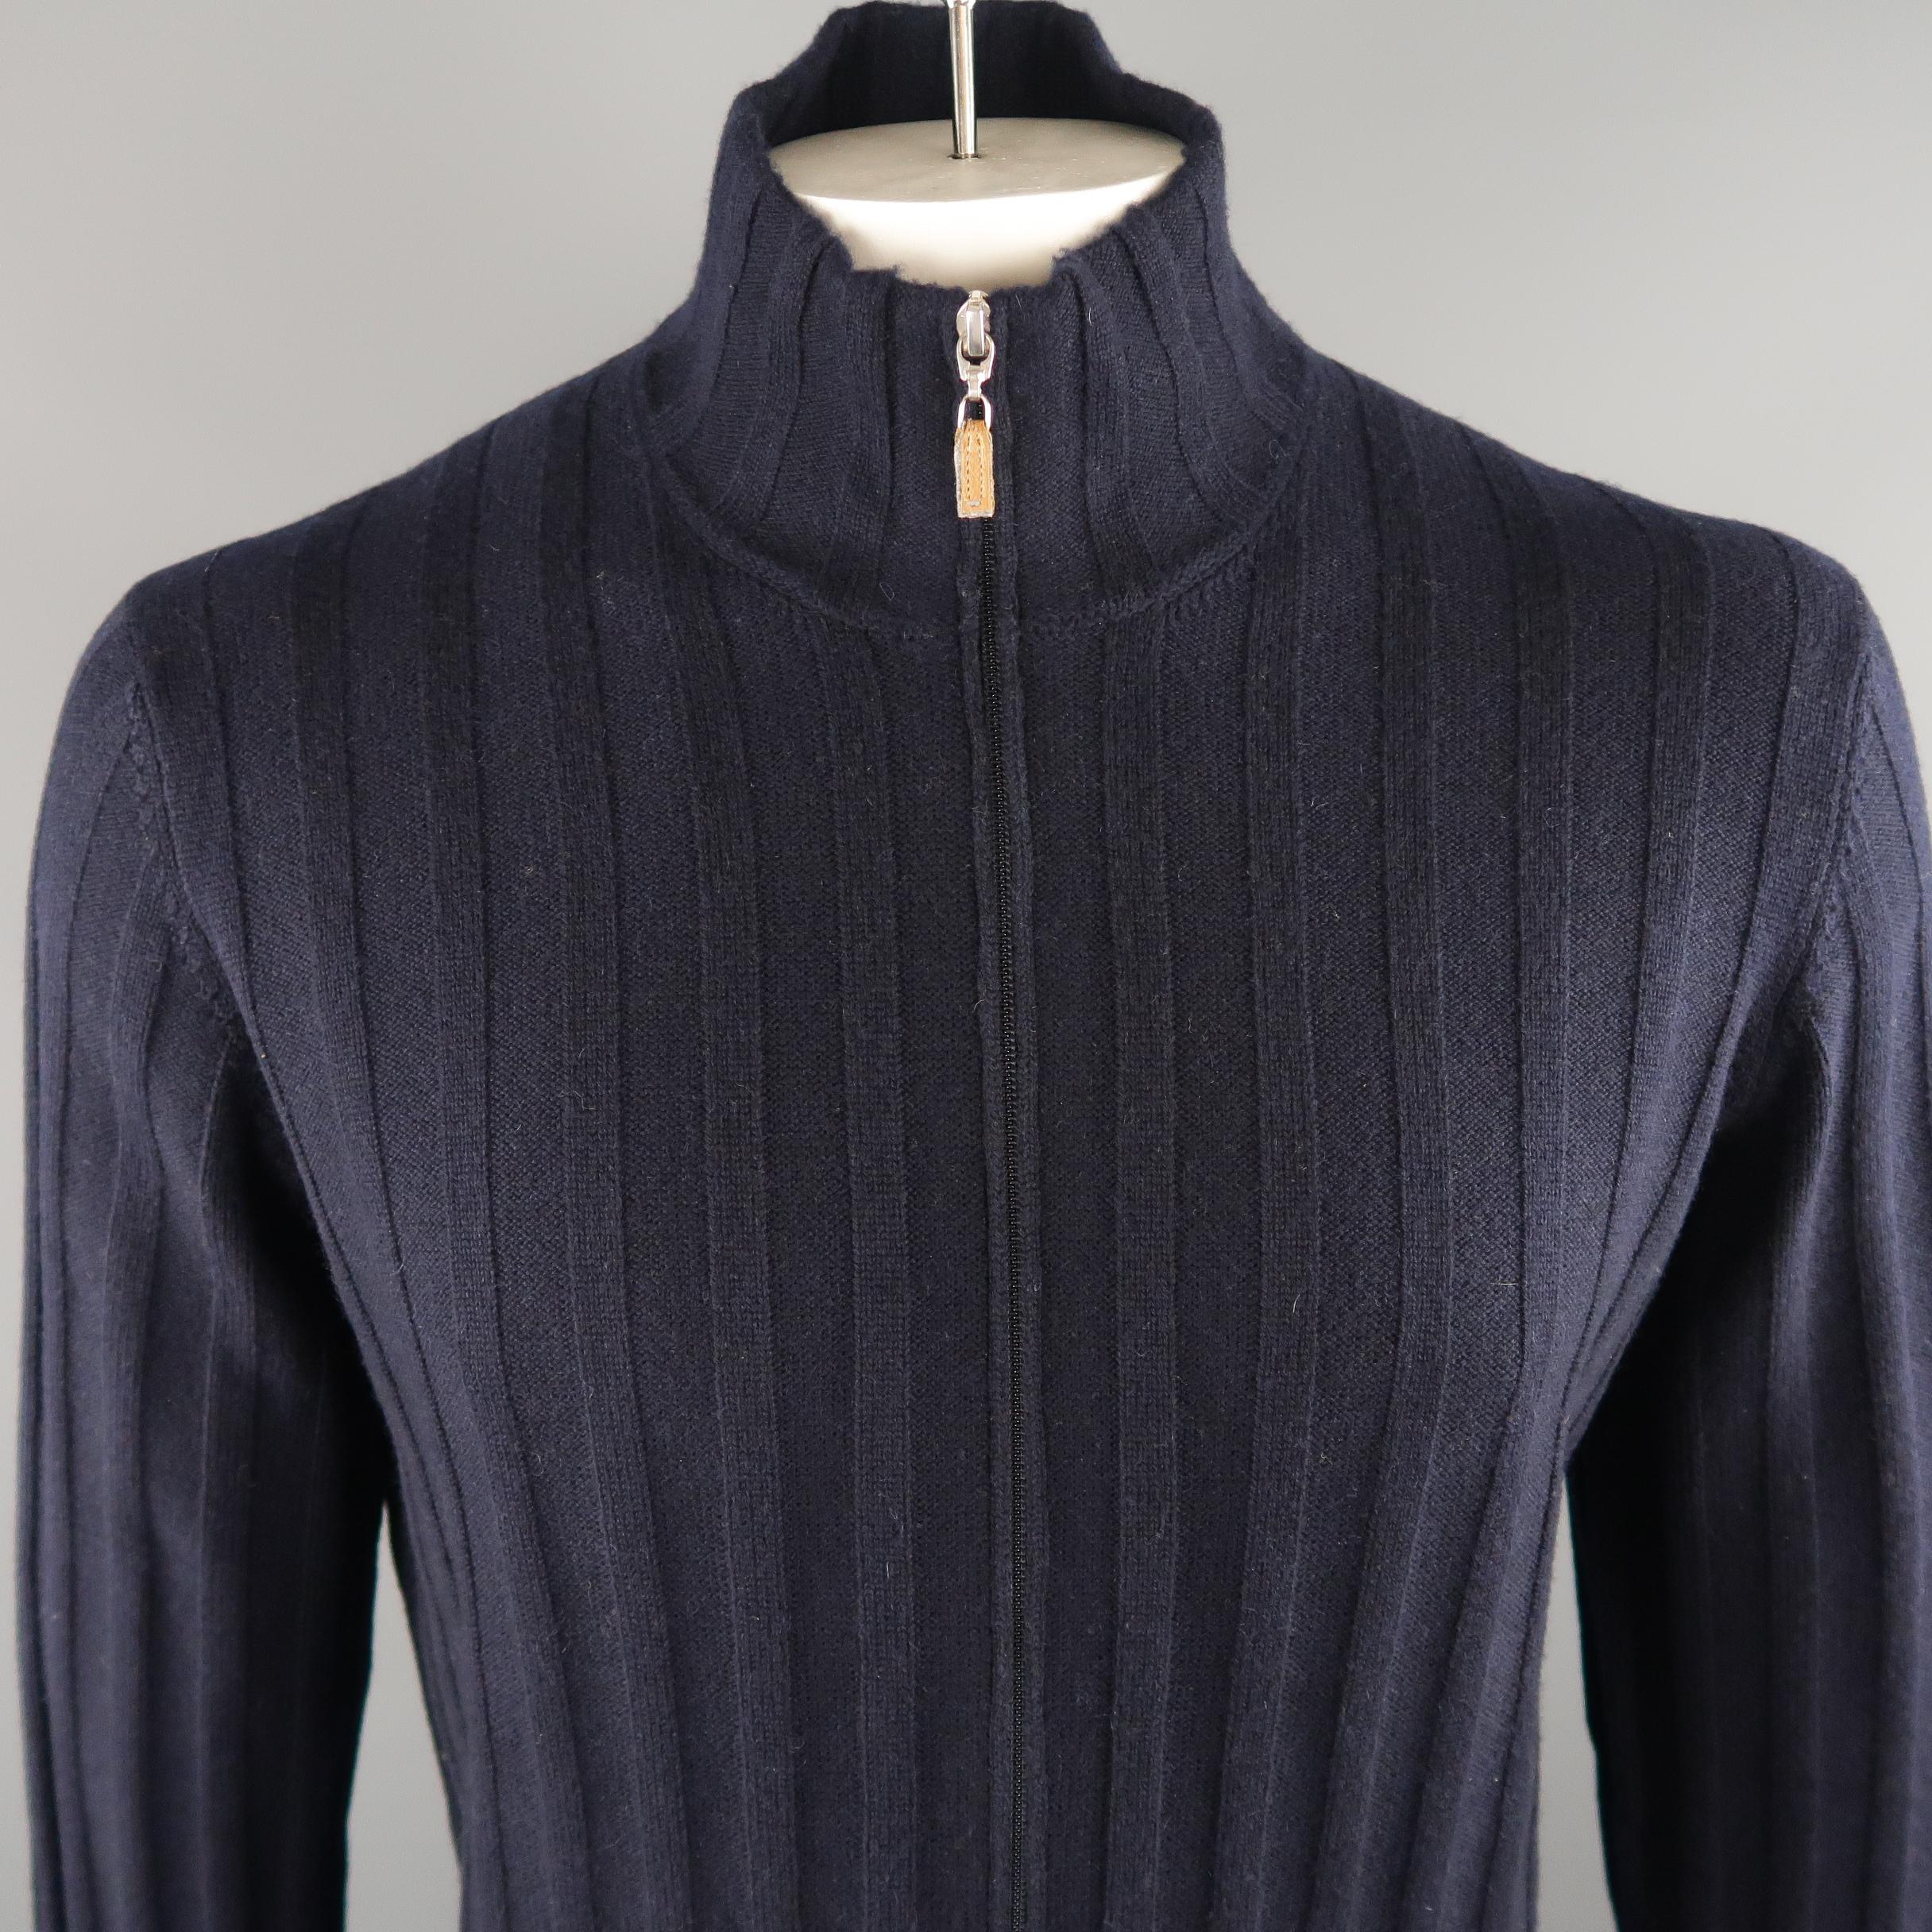 BRUNELLO CUCINELLI cardigan comes in a navy tone in knitted 100% cashmere material, with zip up front, ribbed cuffs and waistband. Made in Italy.
 
Excellent Pre-Owned Condition.
Marked: 54 IT
 
Measurements:
 
Shoulder: 18.5 in.
Chest: 46